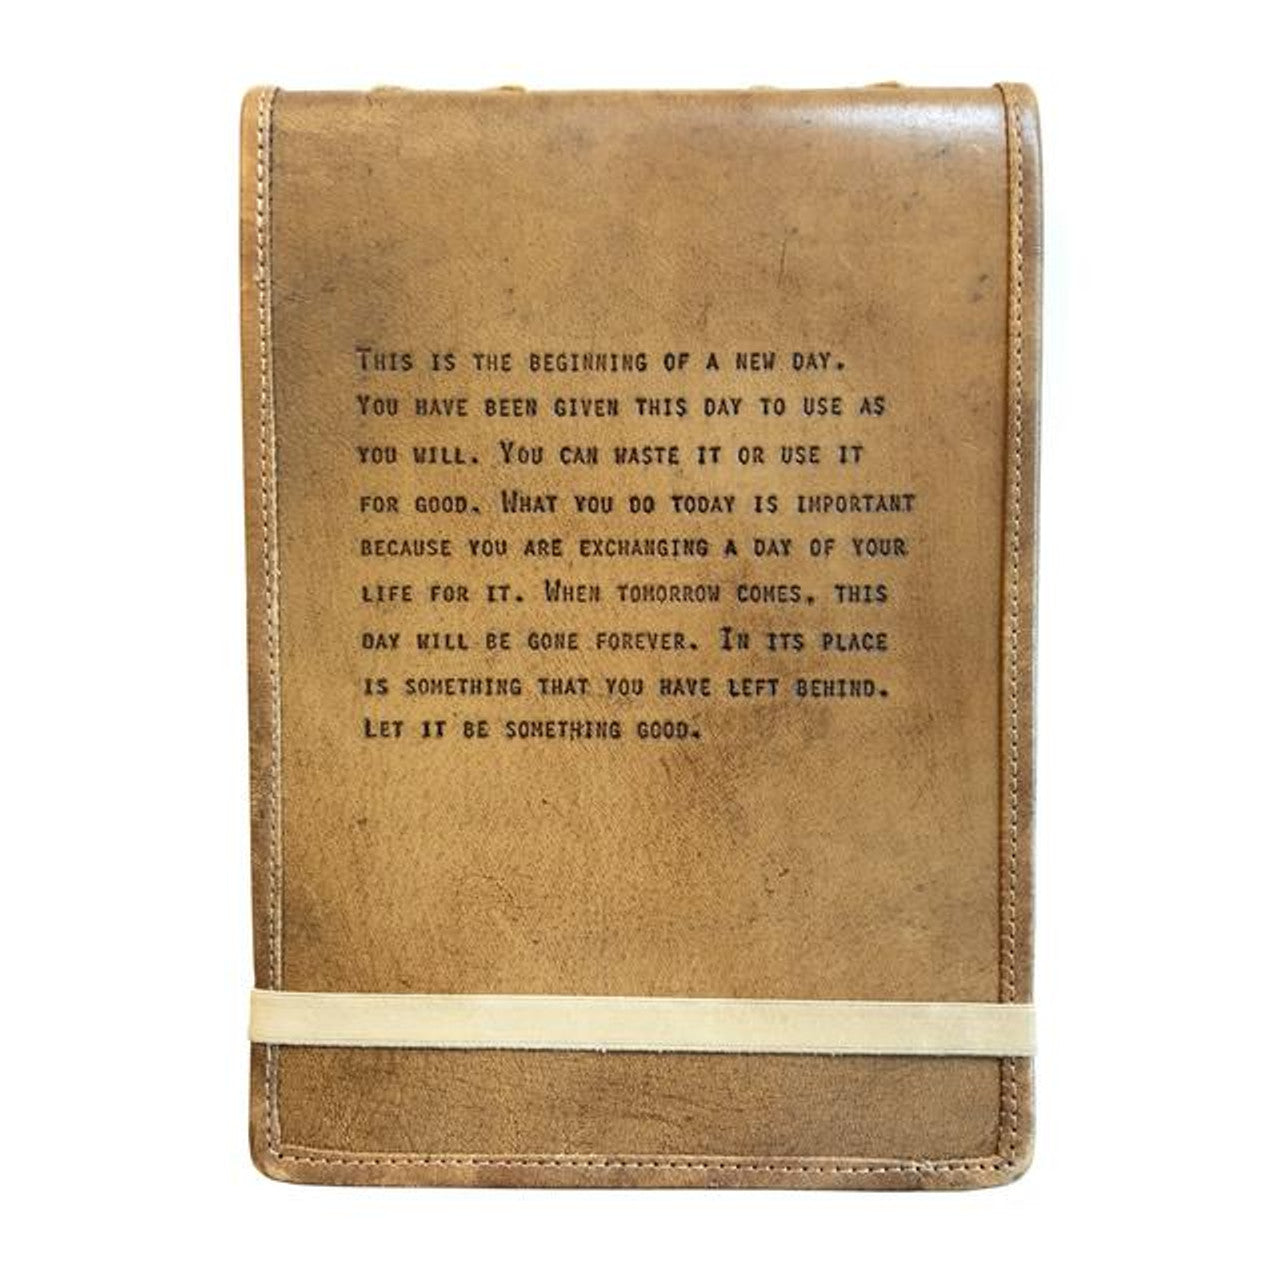 Large Leather Journal - This Is The Beginning